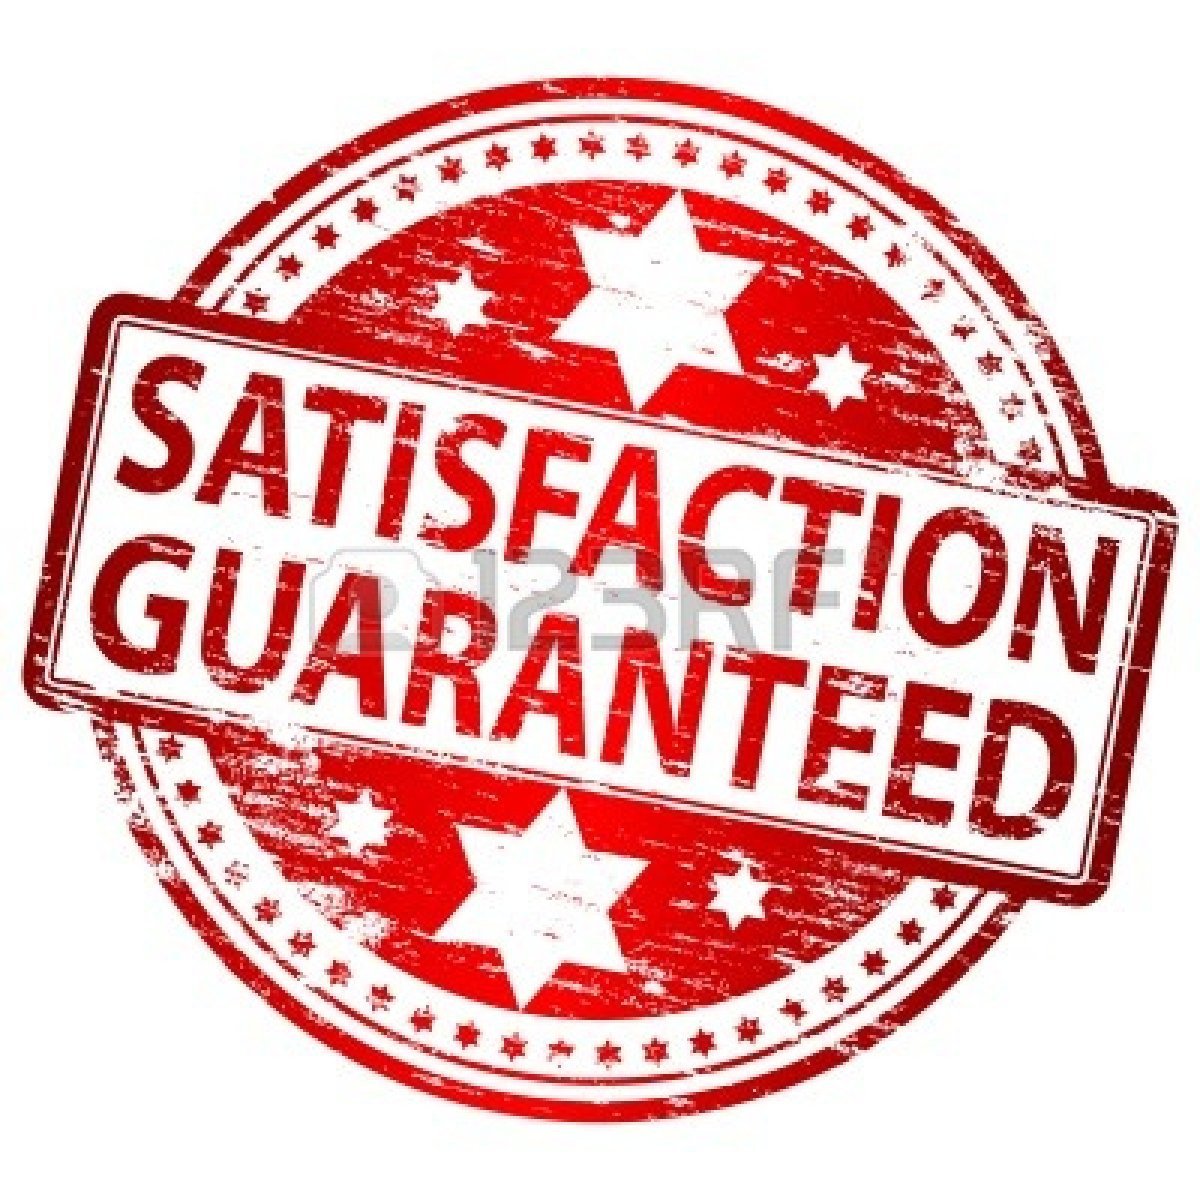 8986328 satisfaction guaranteed rubber stamp 2994b25f 0d76 46df a5a2 29249400d423